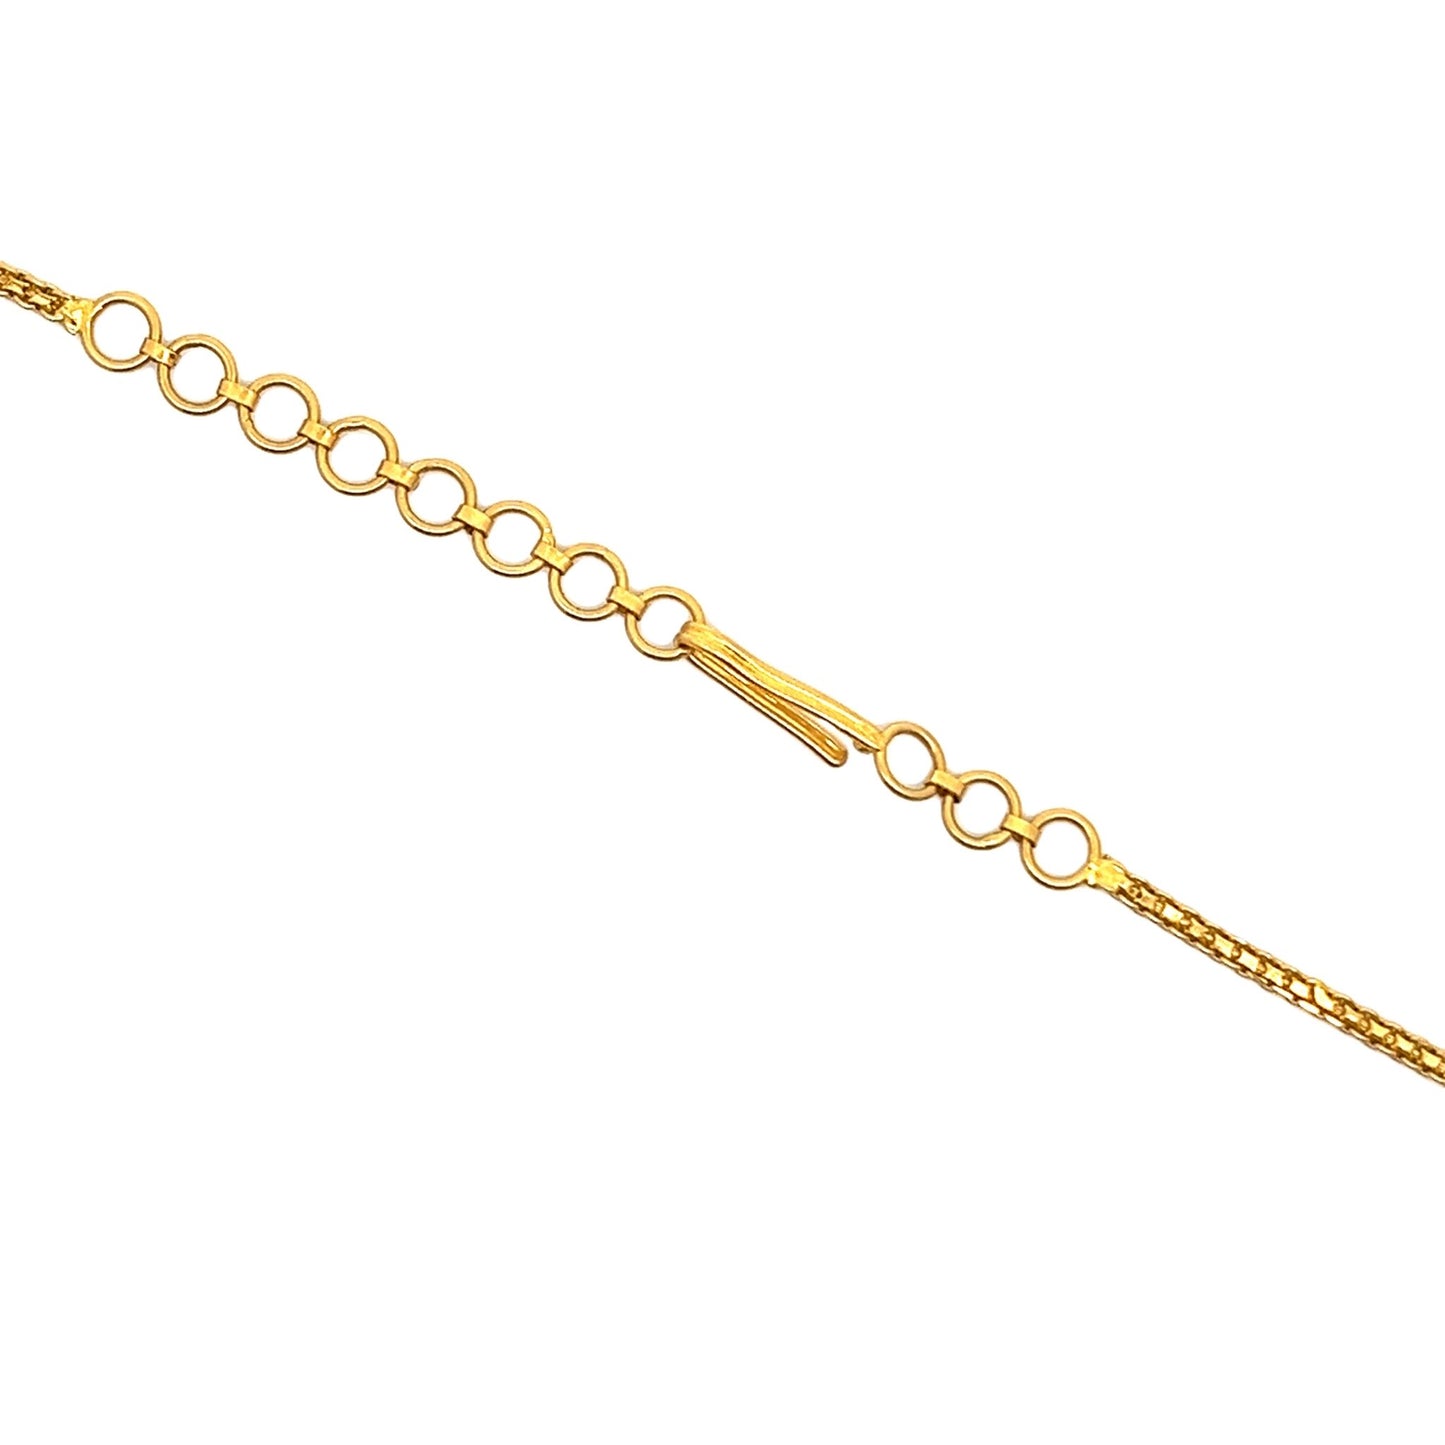 22ct yellow gold necklace 07001372NecklacesRetroGold